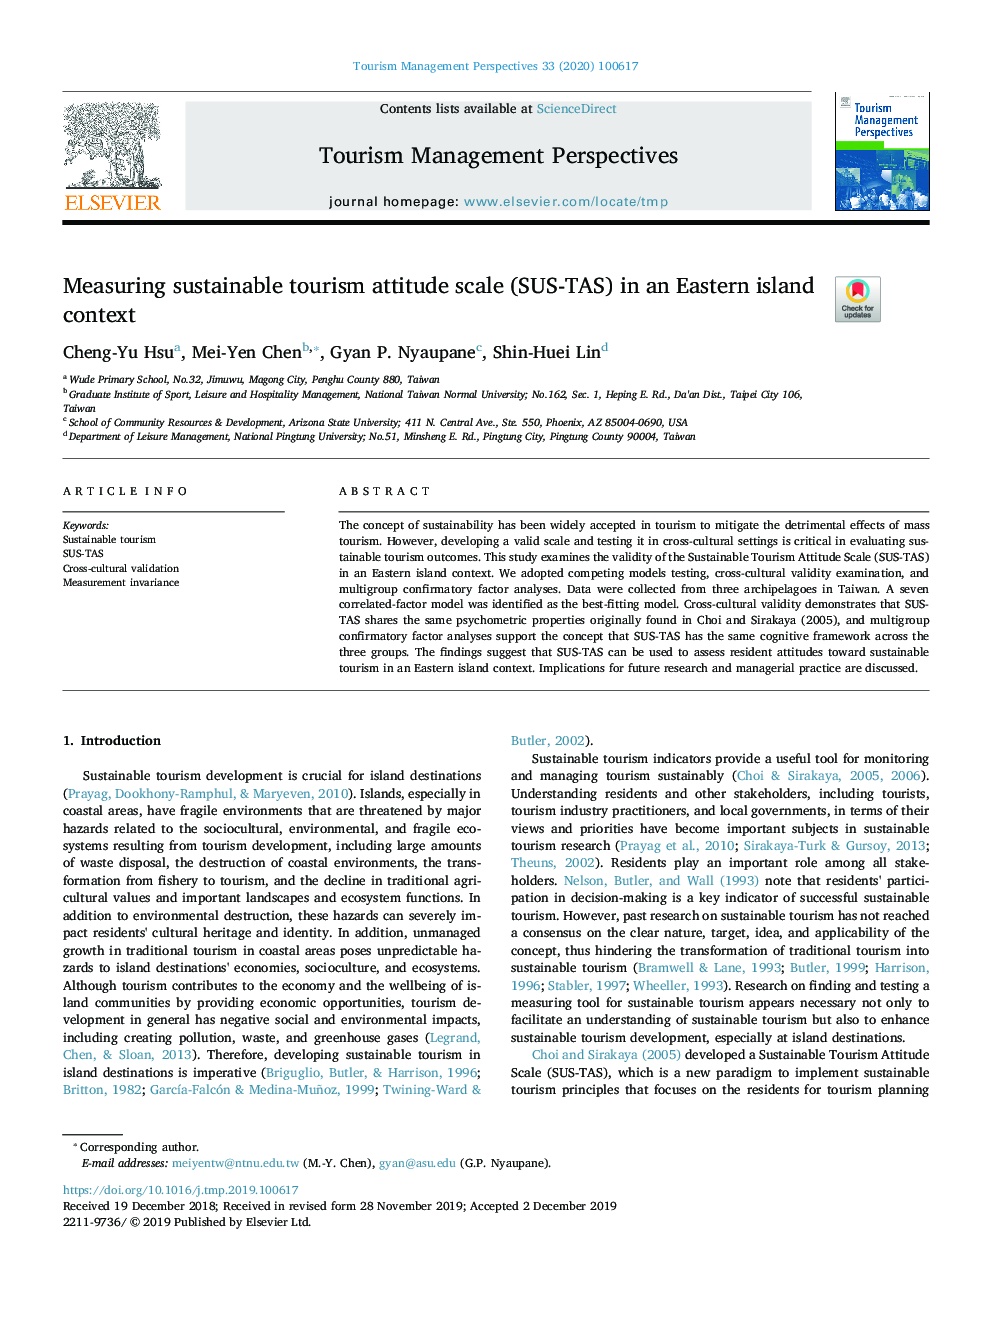 Measuring sustainable tourism attitude scale (SUS-TAS) in an Eastern island context